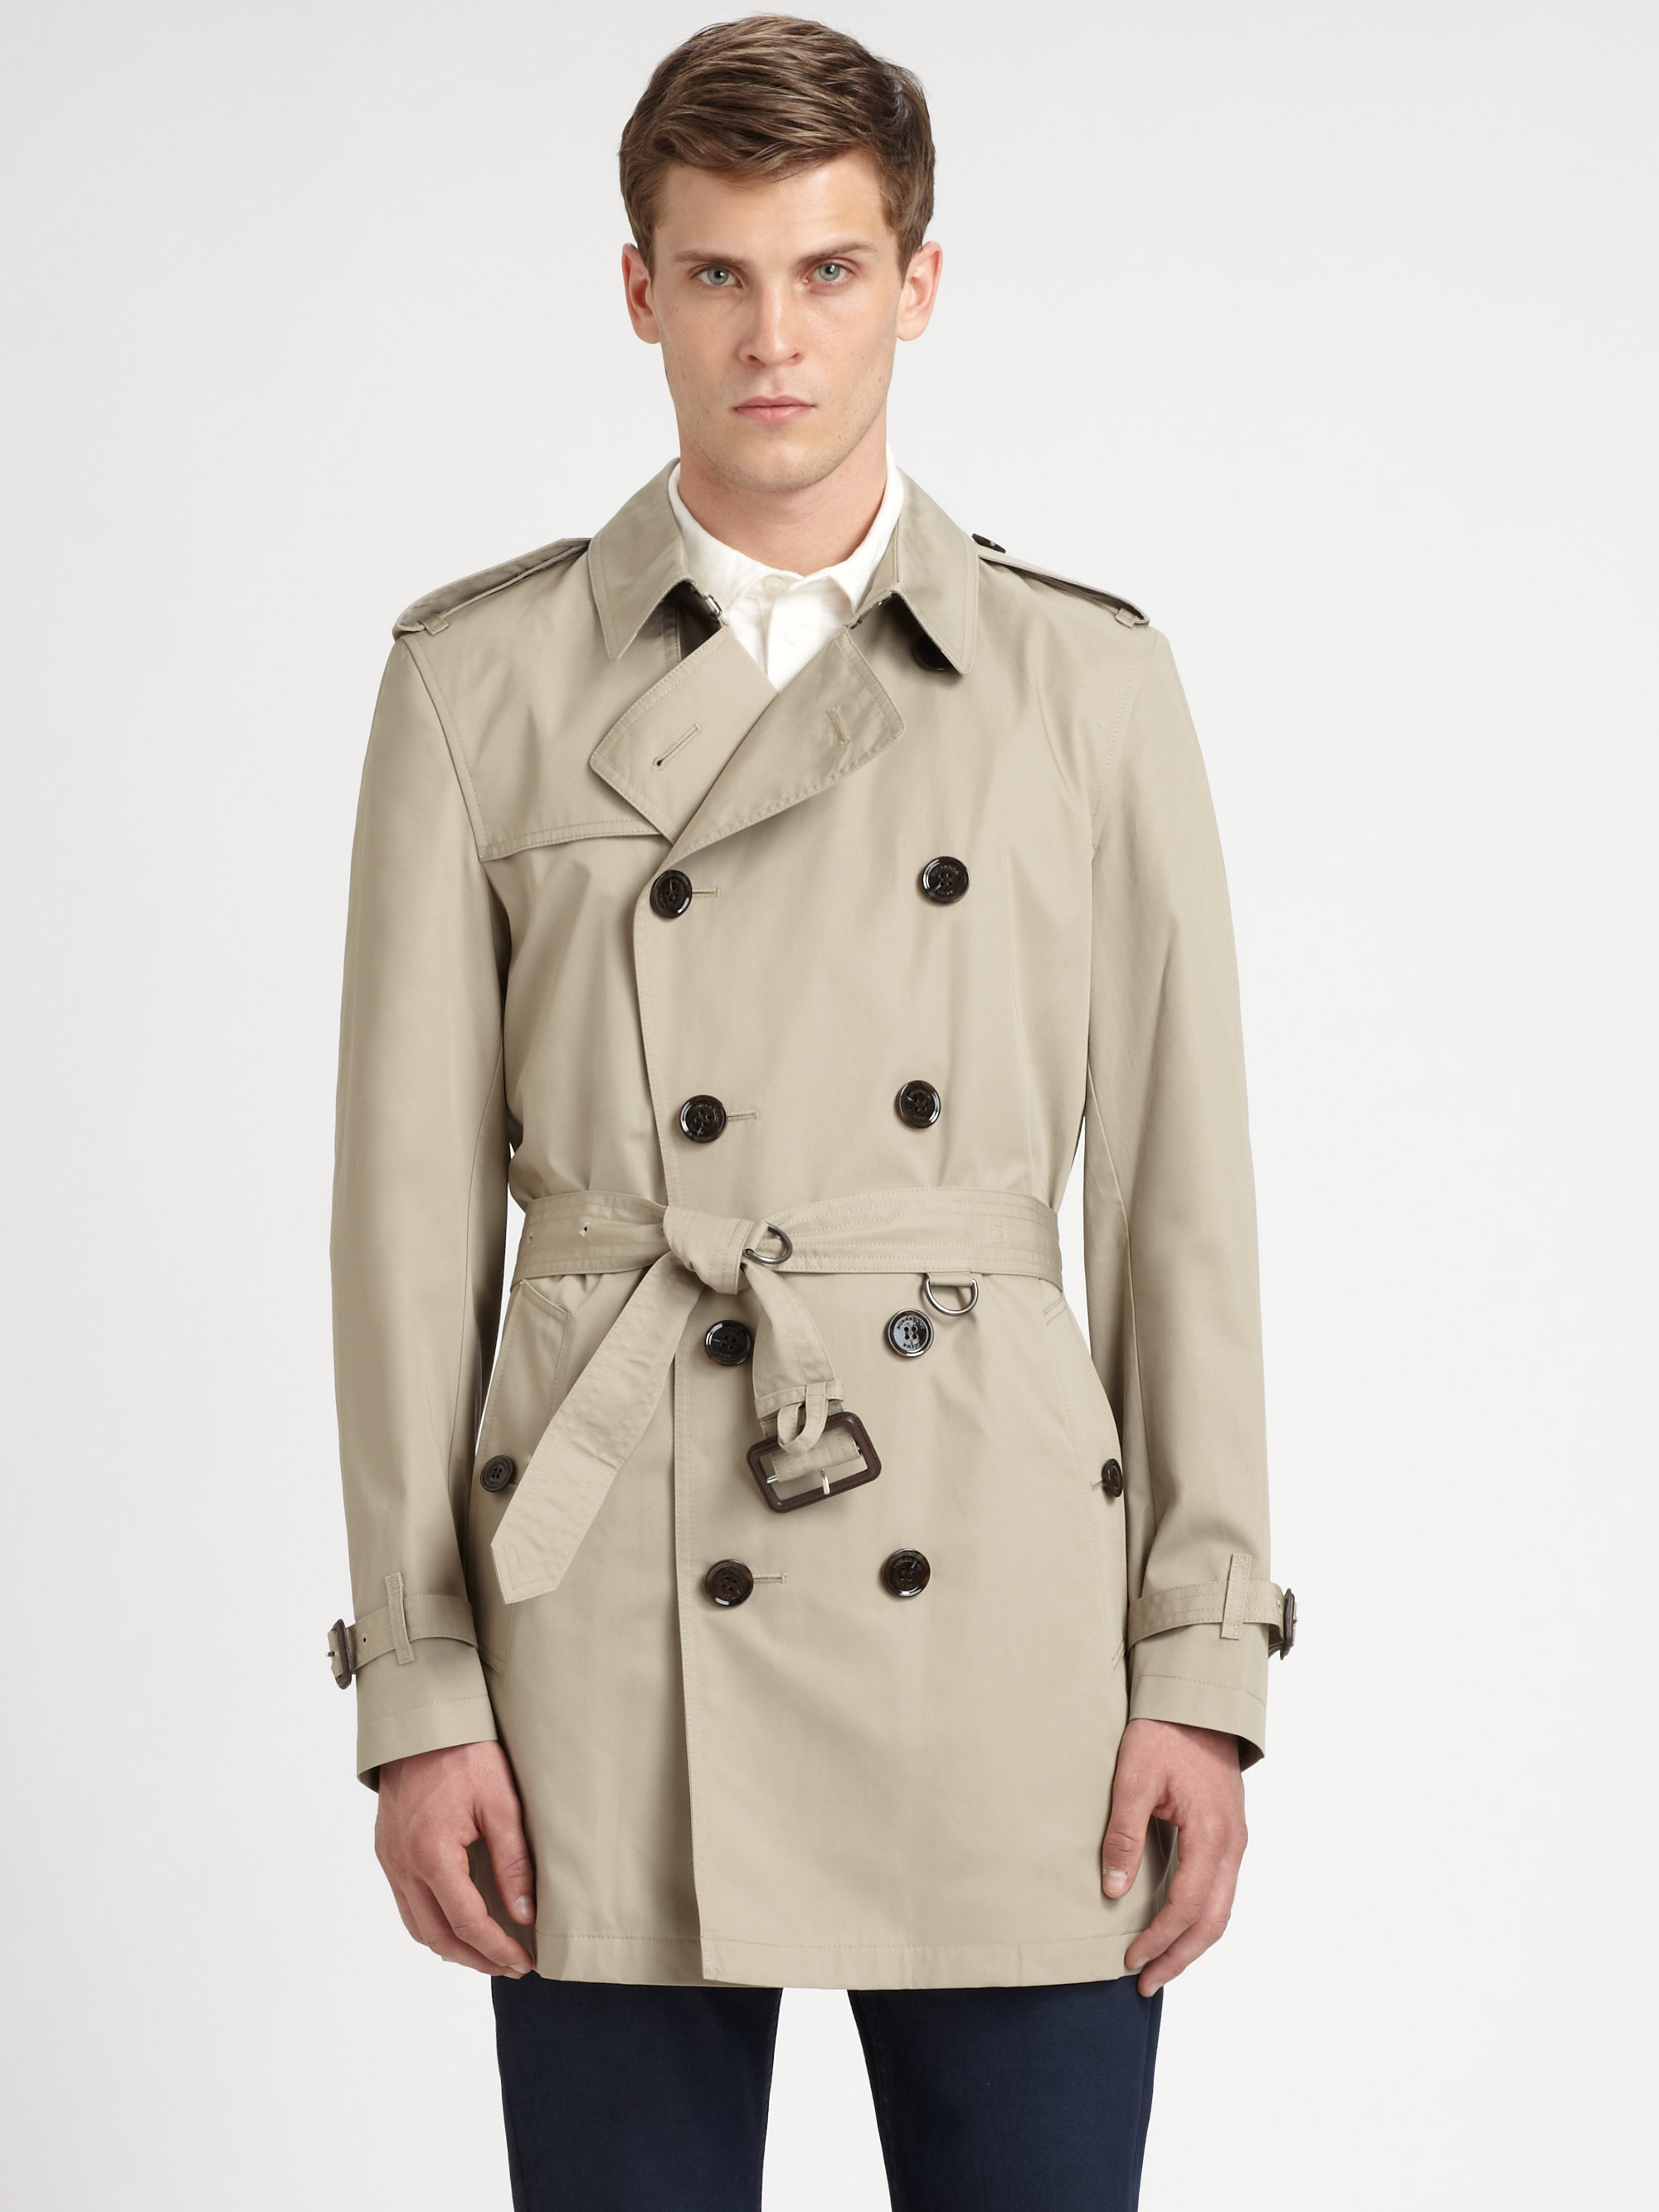 Lyst - Burberry Brit Britton Double Breasted Trench Coat in Natural for Men